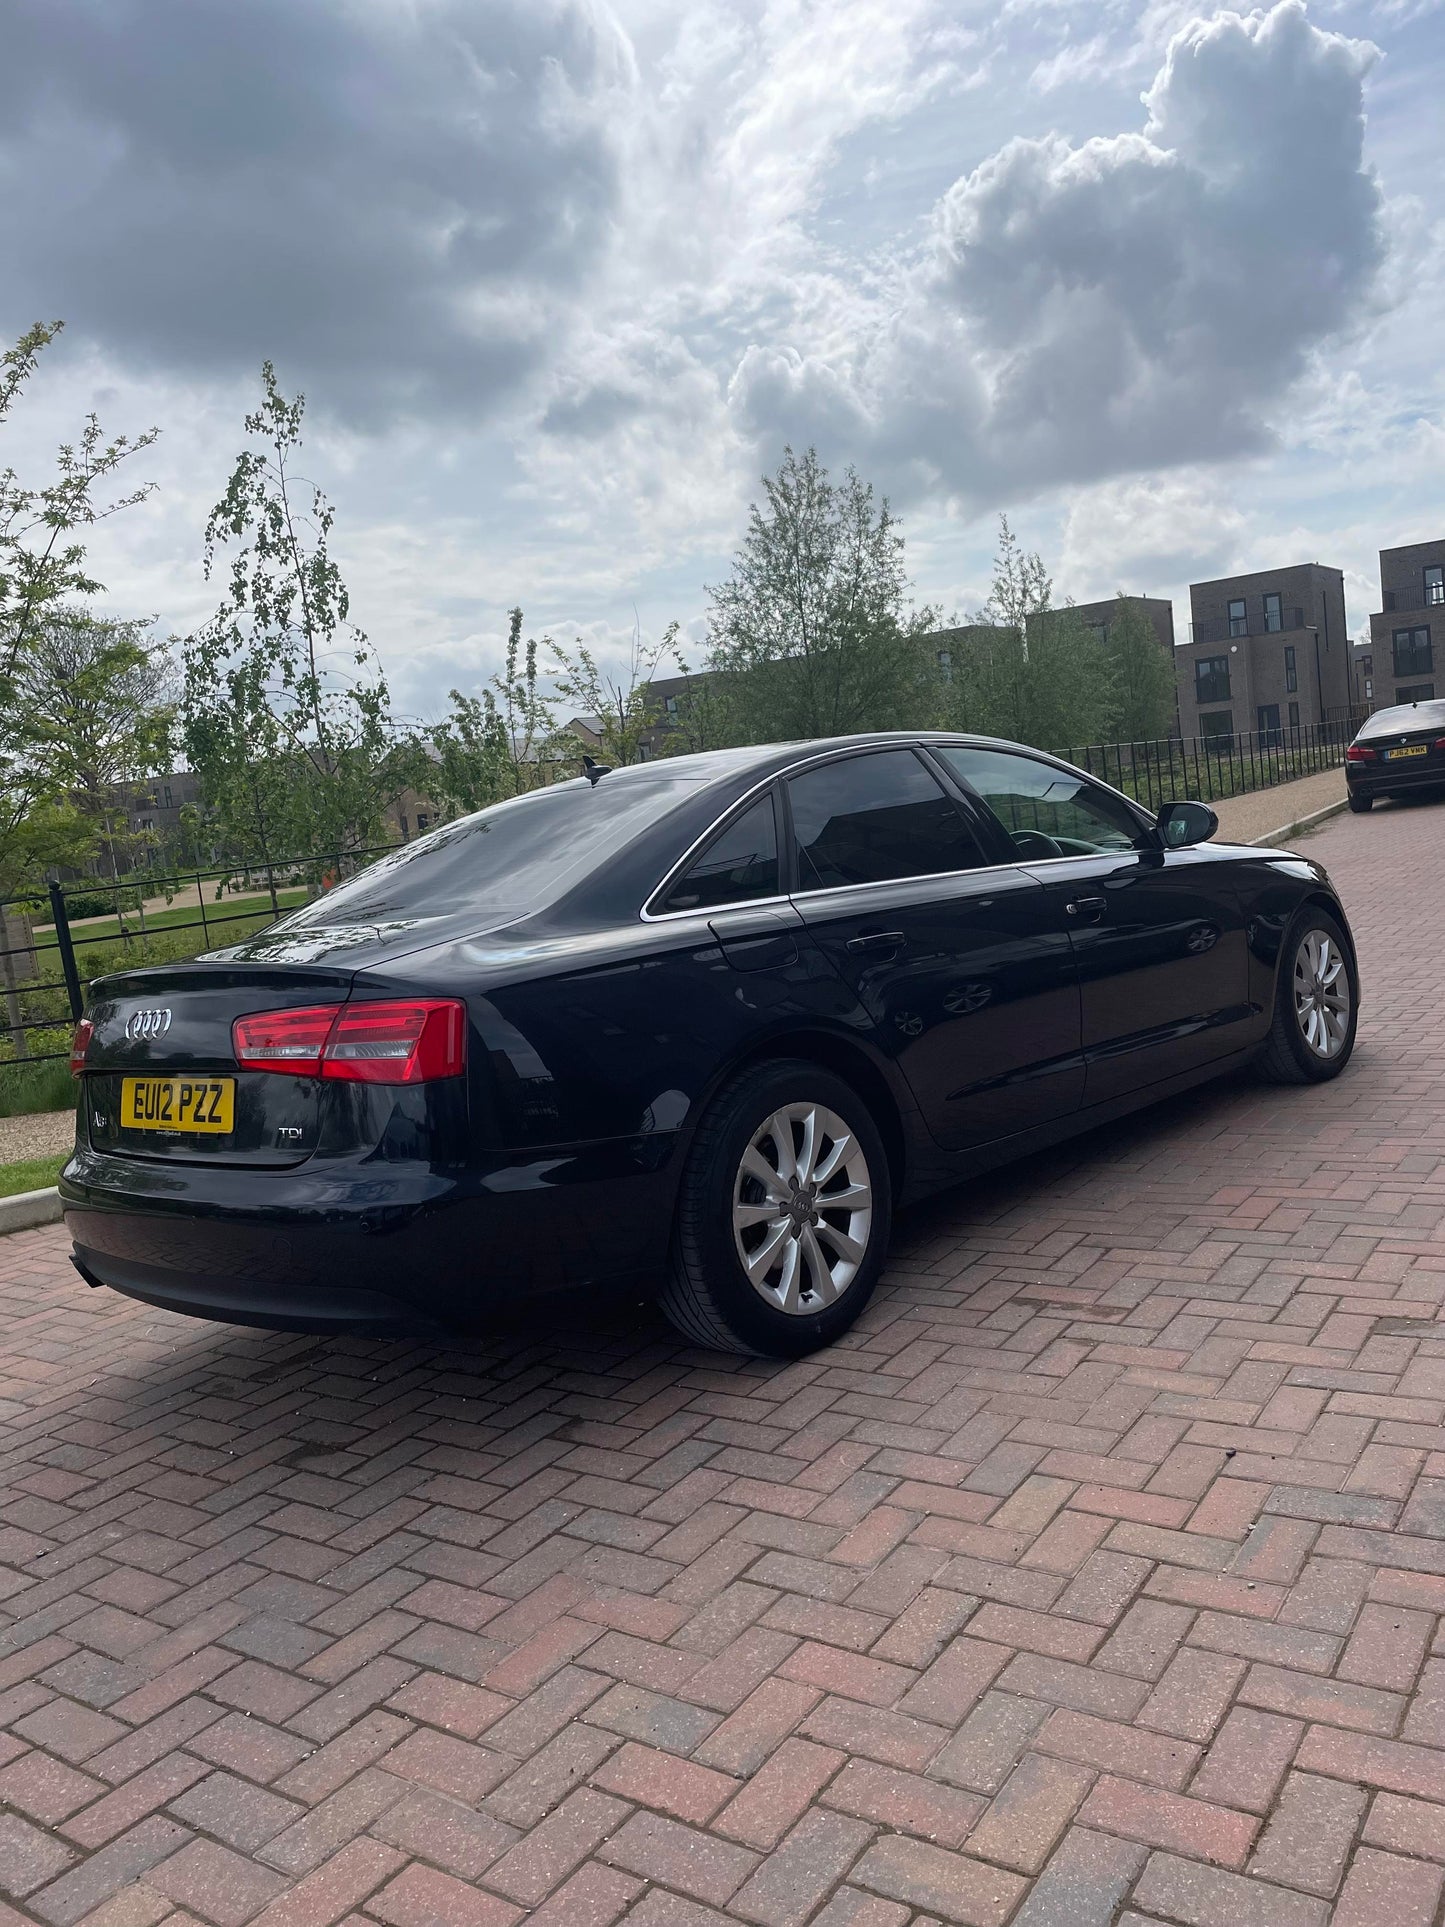 Bid on AUDI A6 2.0 TDI- Buy &amp; Sell on Auction with EAMA Group